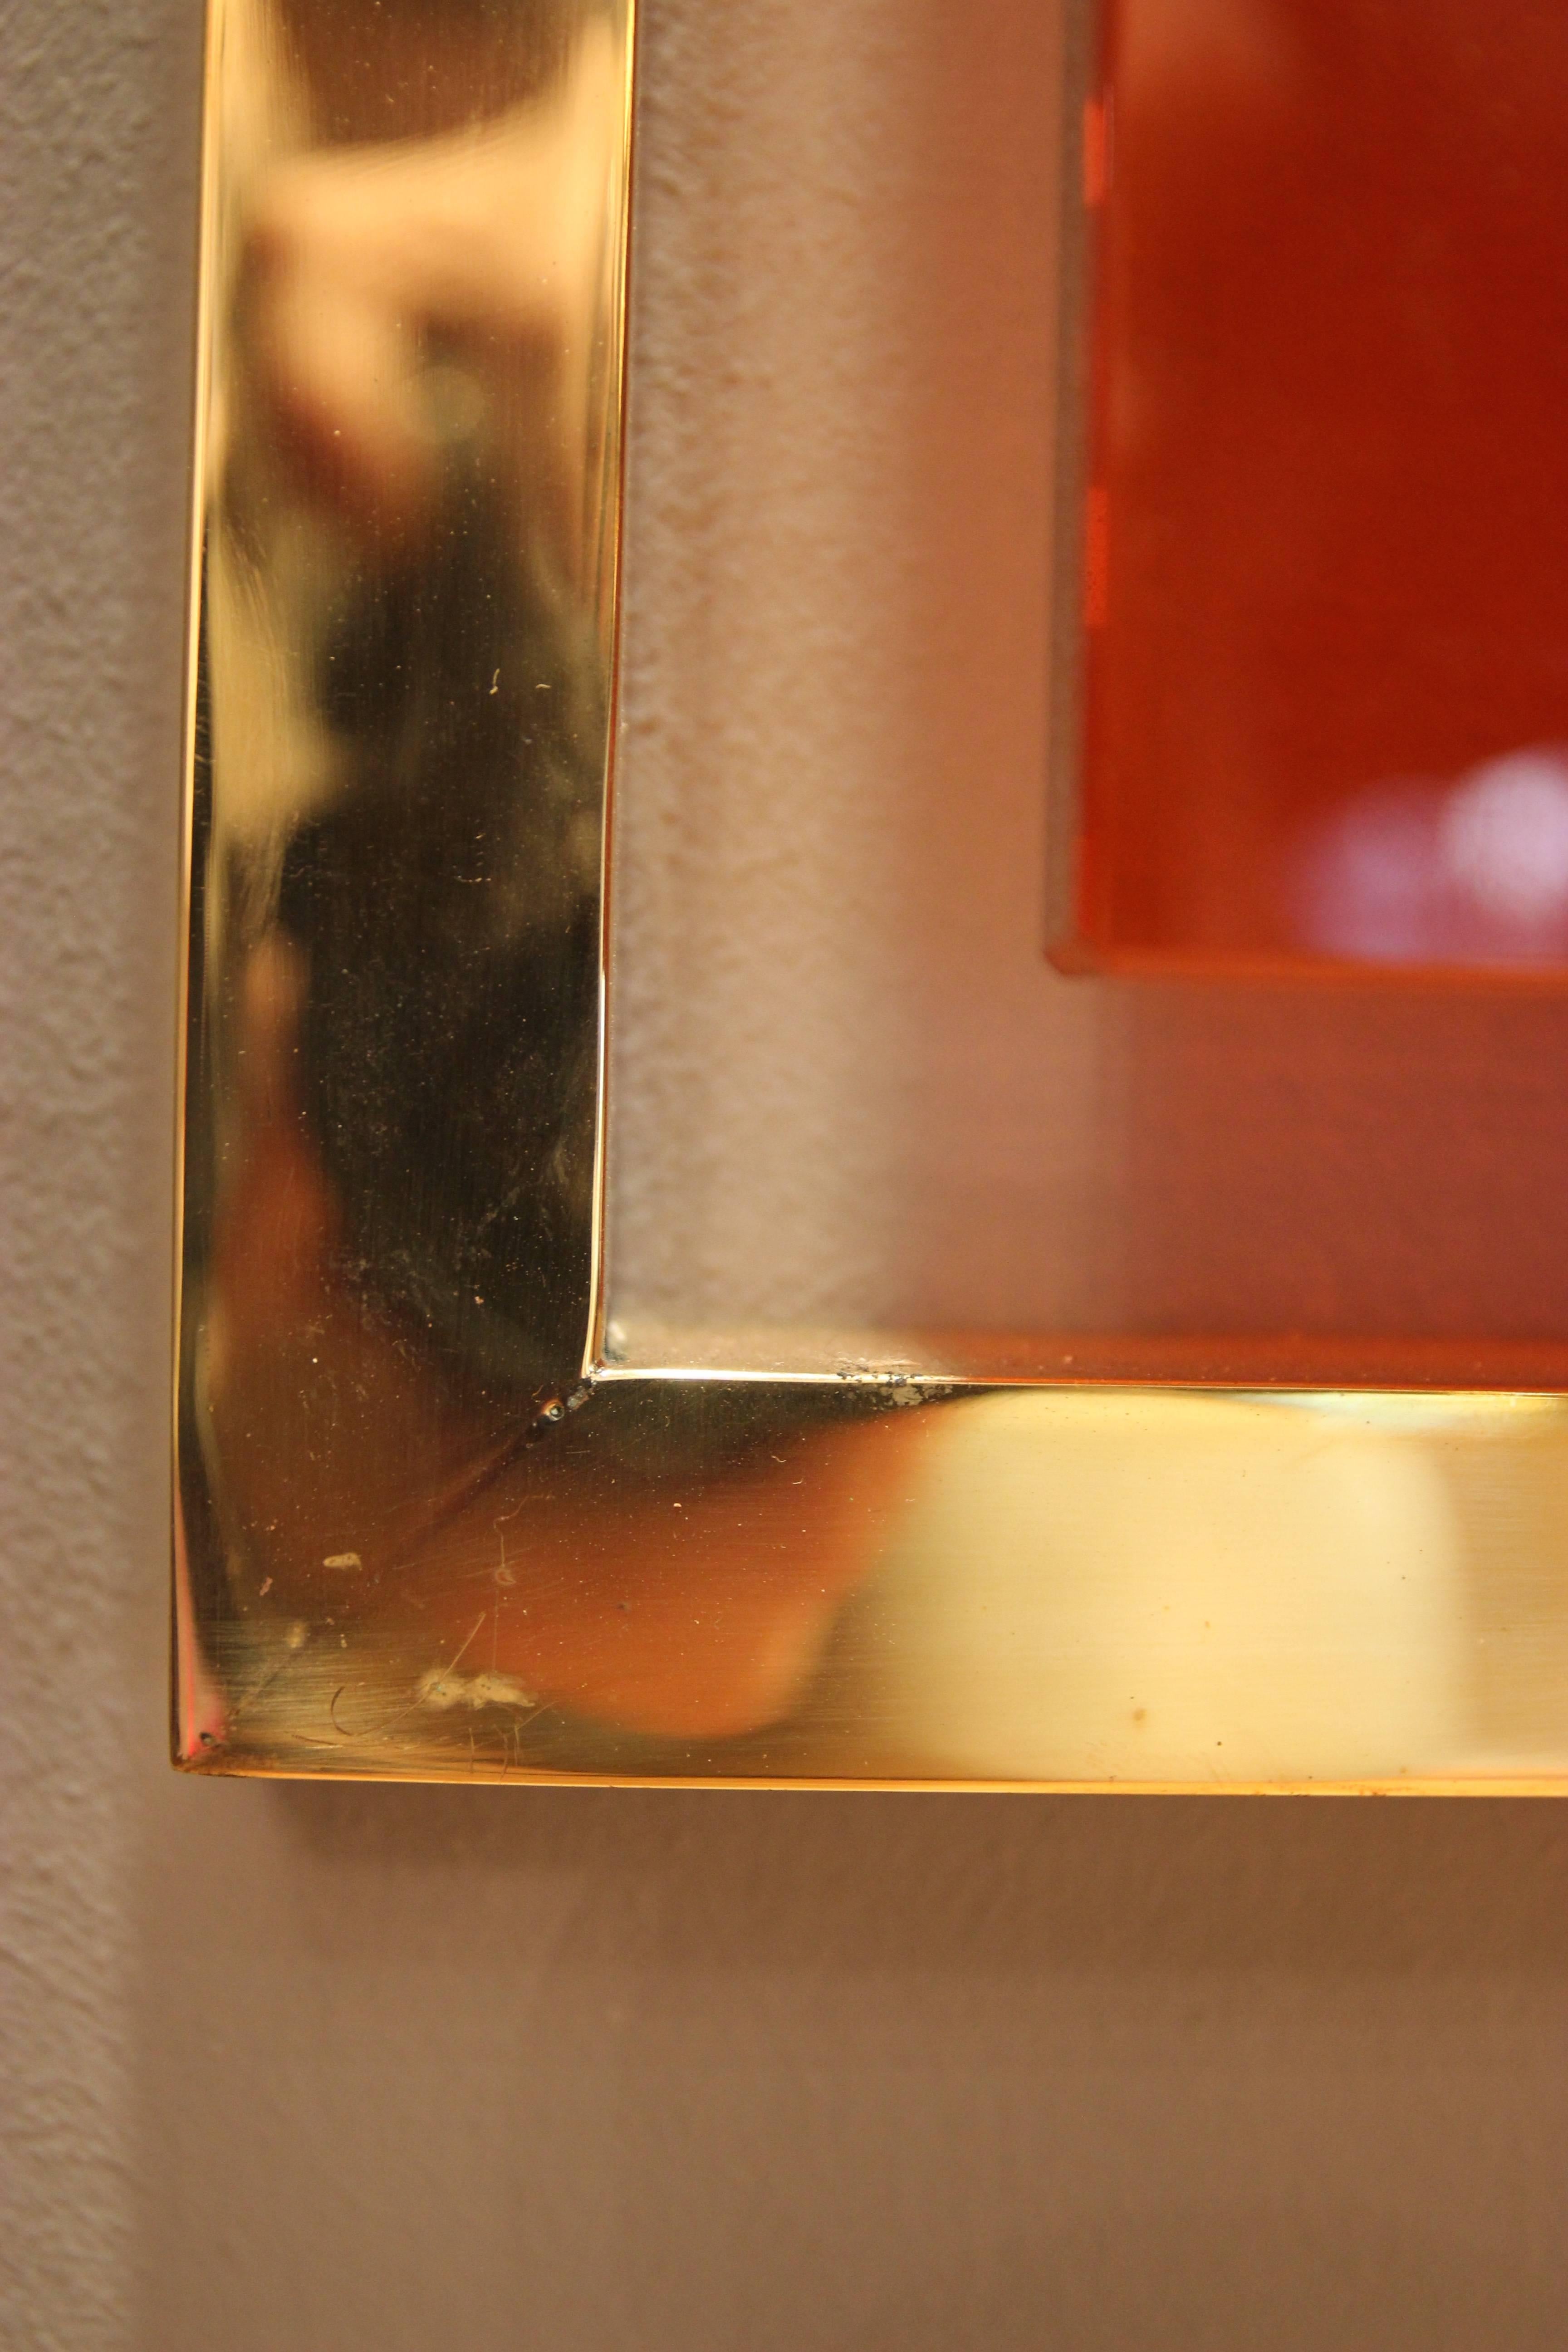 Wall mirror,
Gold-plated brass and orange glass,
Circa 2010, Italy.
Height: 112 cm, width 80 cm, depth: 8 cm.

